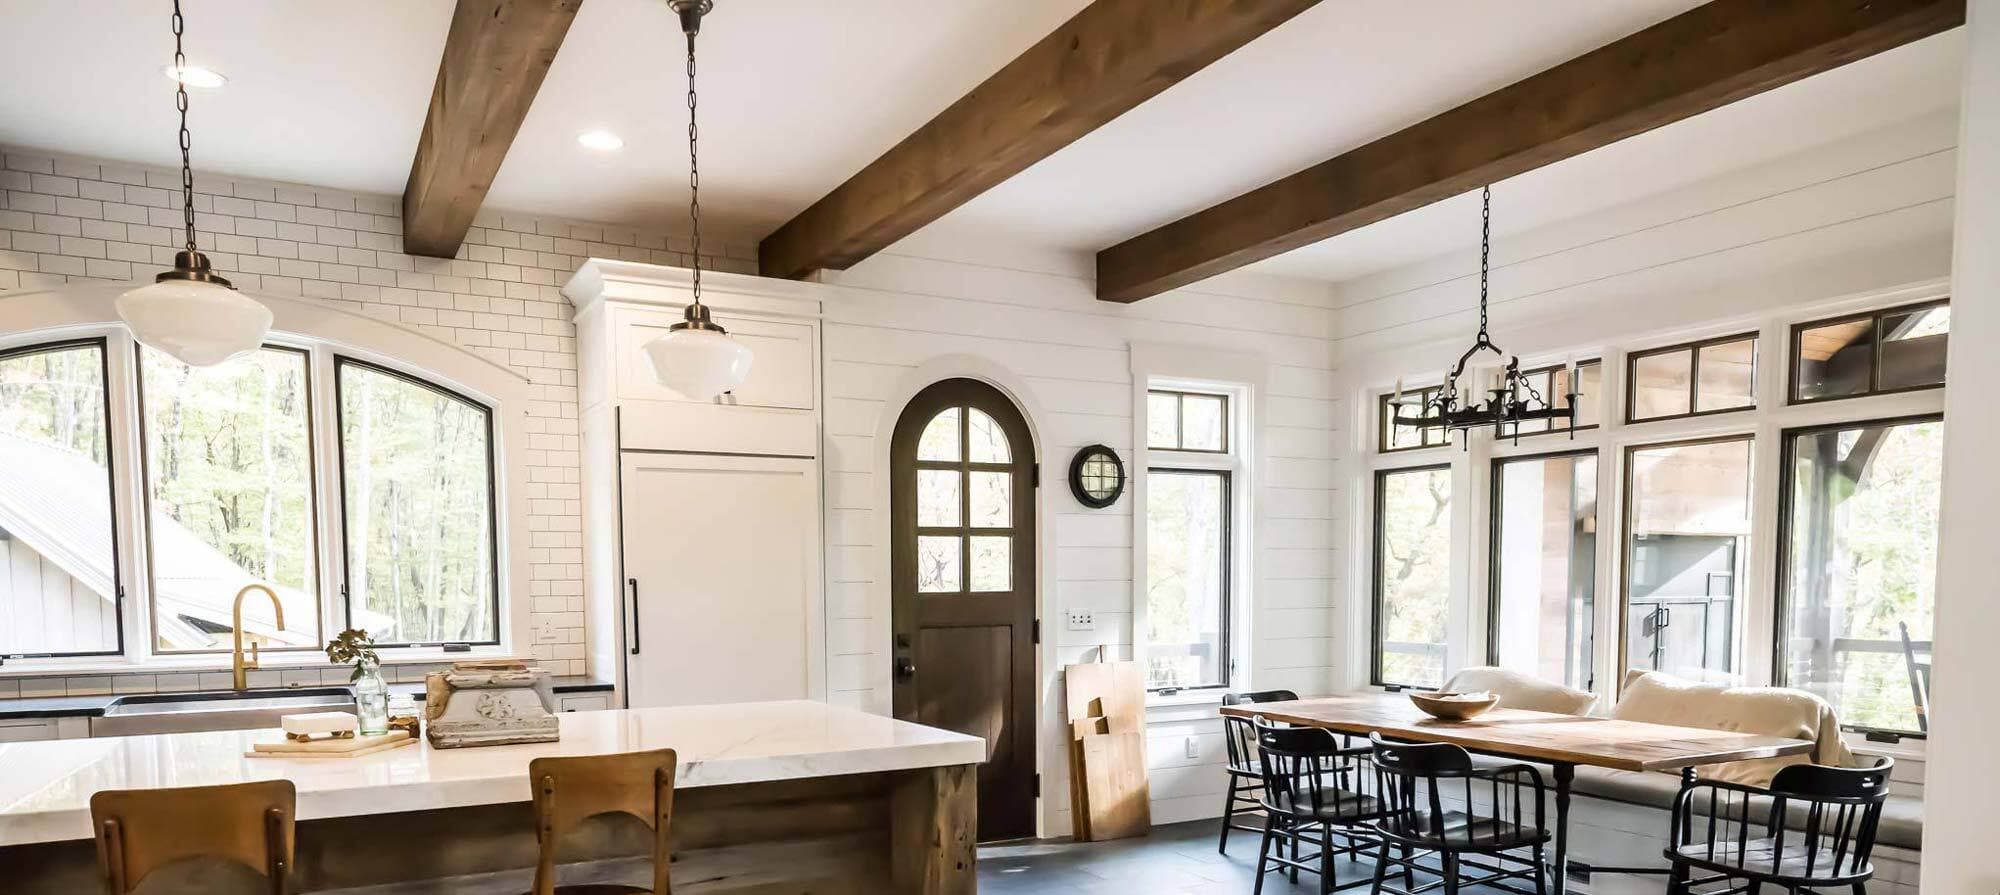 Stunning rustic reclaimed ceiling beams in kitchen.